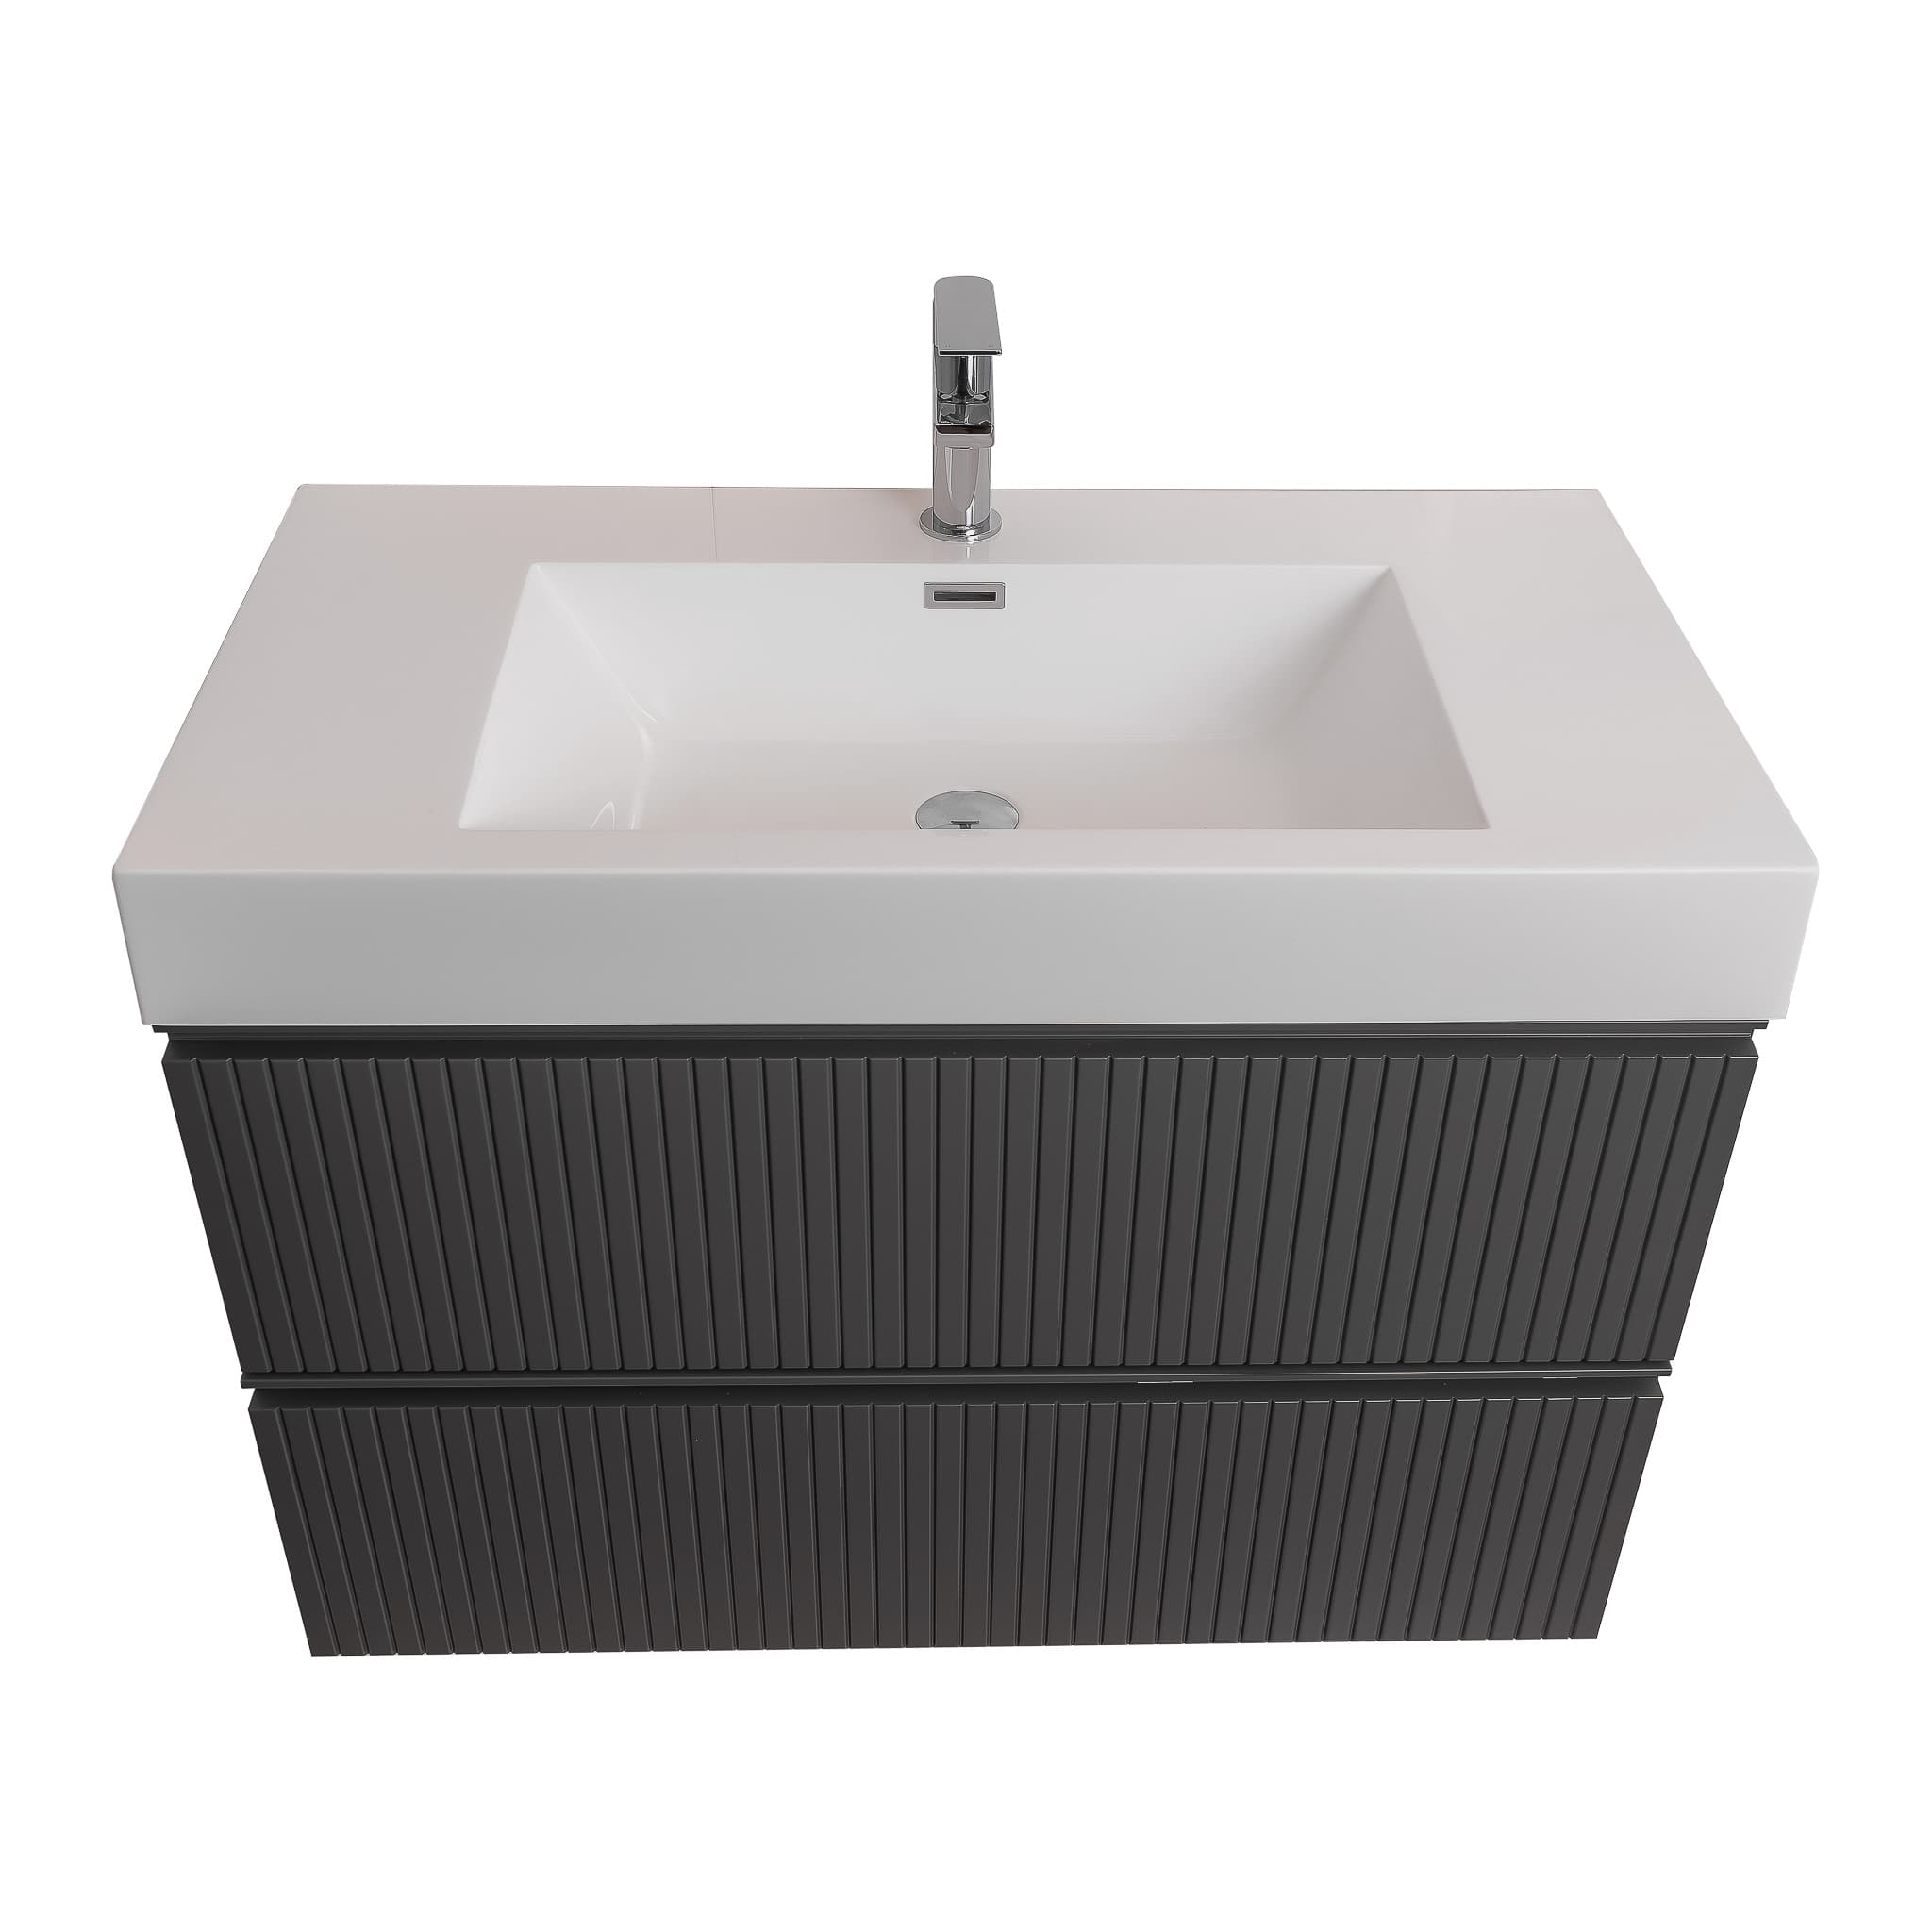 Ares 31.5 Matte Grey Cabinet, Square Cultured Marble Sink, Wall Mounted Modern Vanity Set